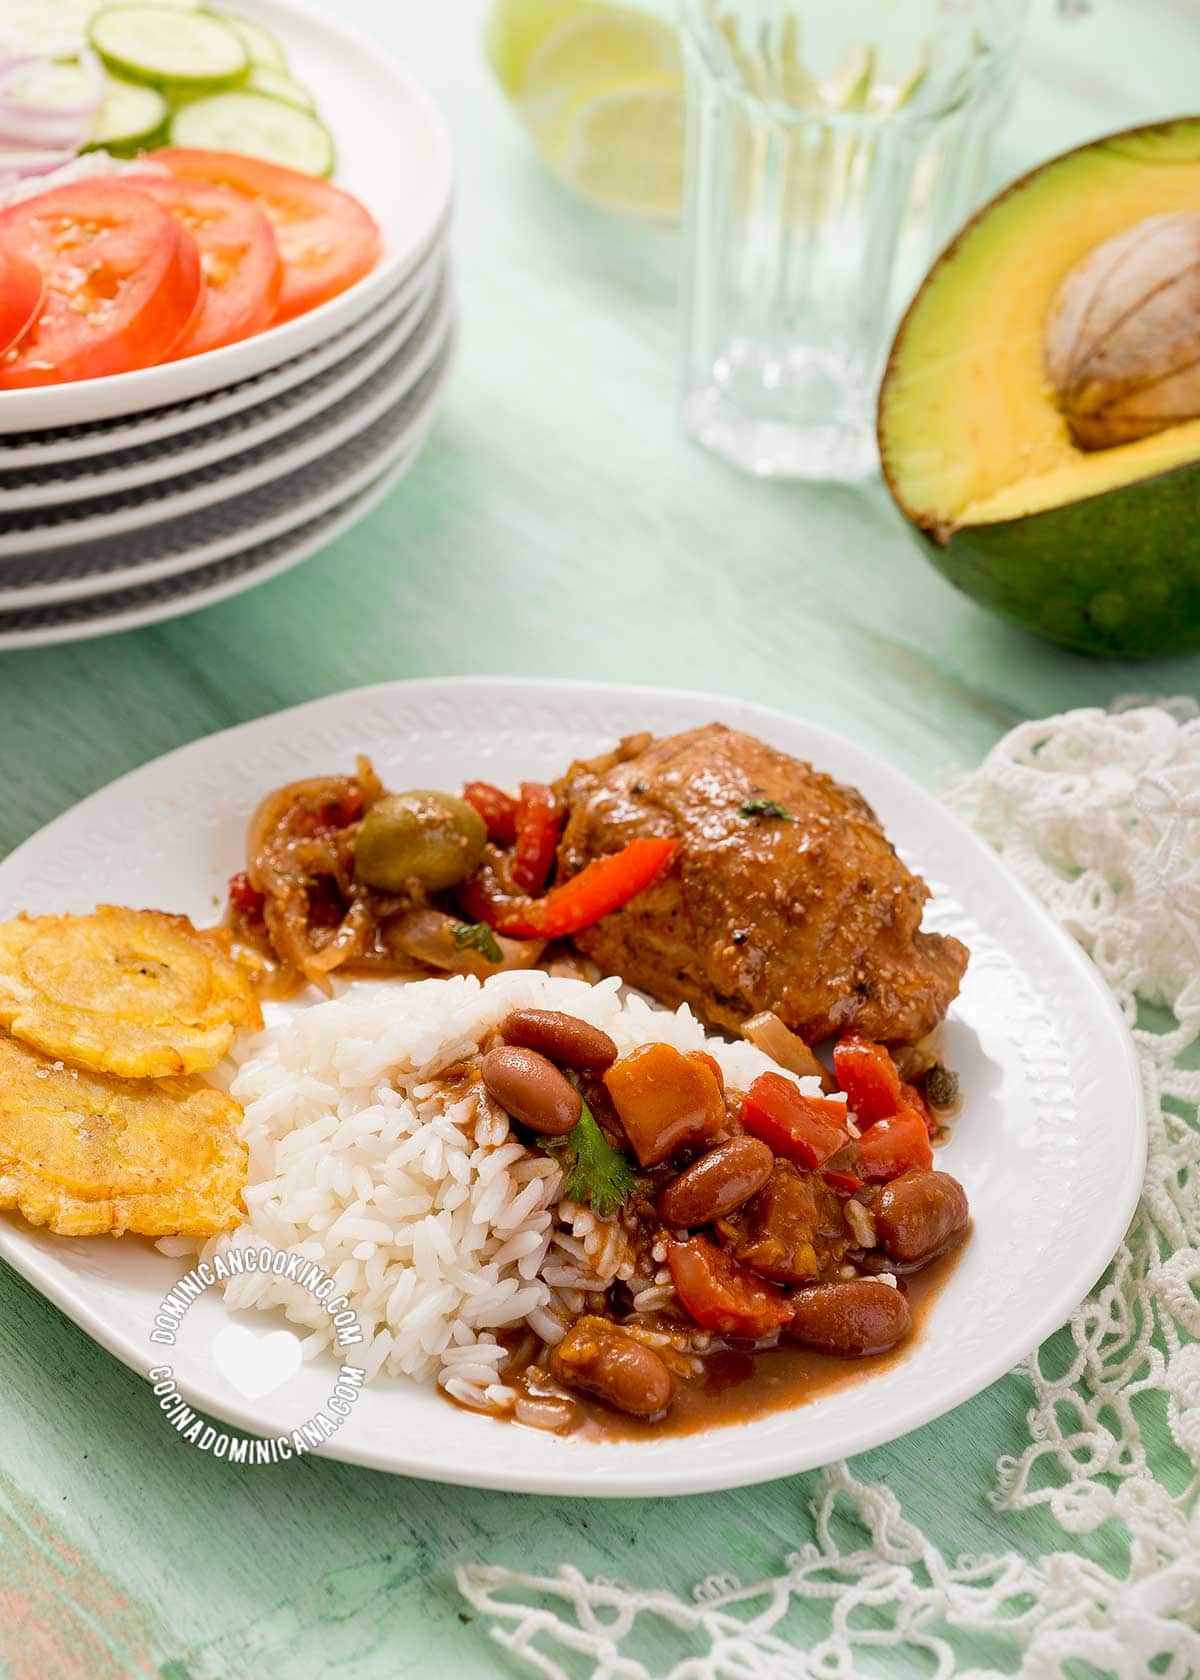 Dominican dish of rice, beans and chicken served with salad and avocado